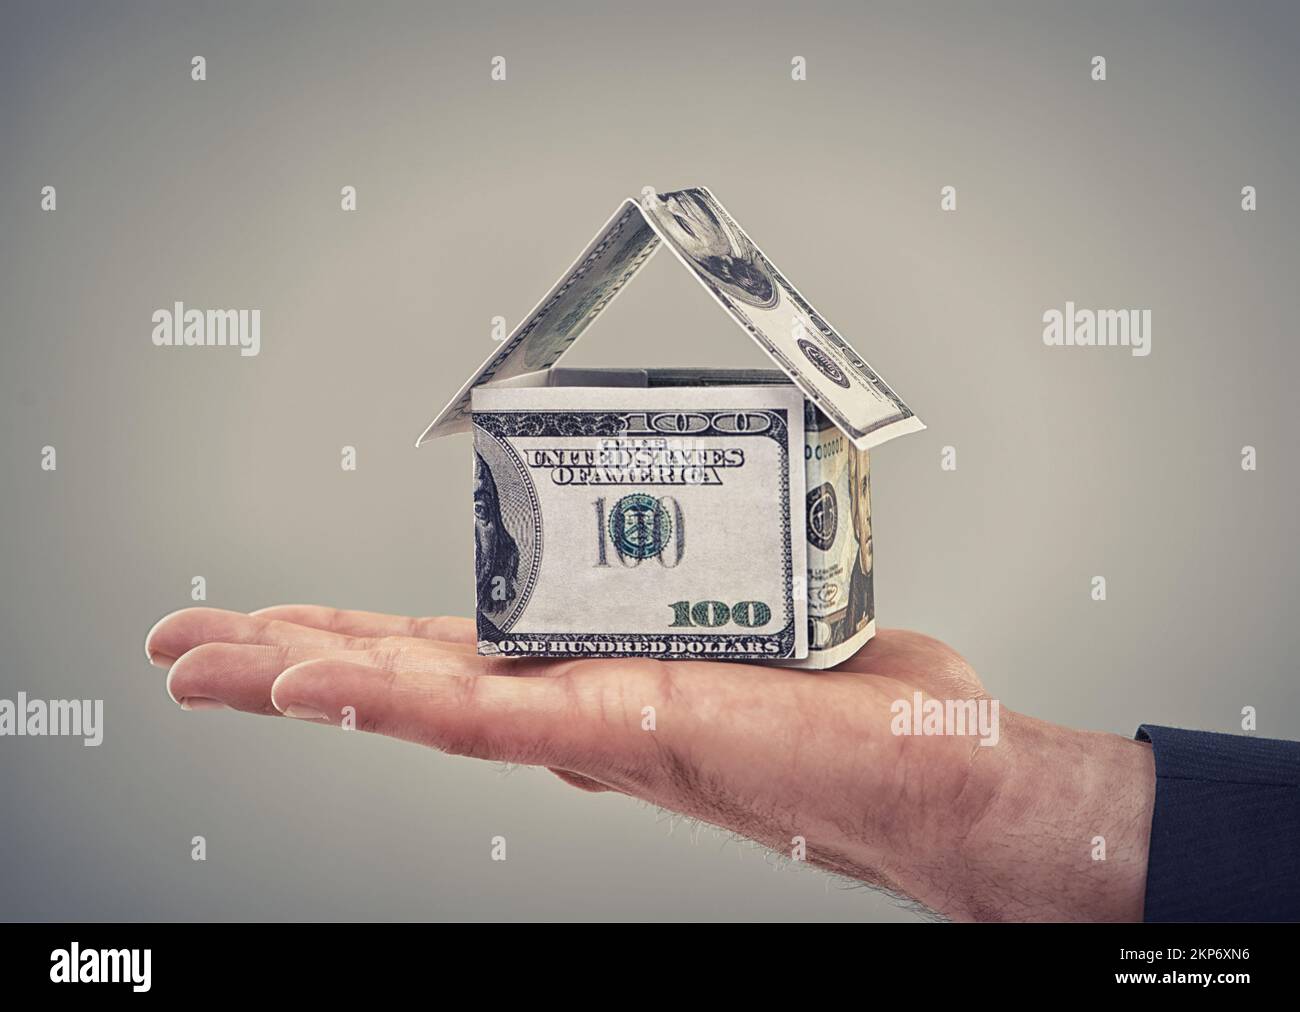 He can buy his dream home now. Close up conceptual shot of a man holding money that has been made to look like a house. Stock Photo